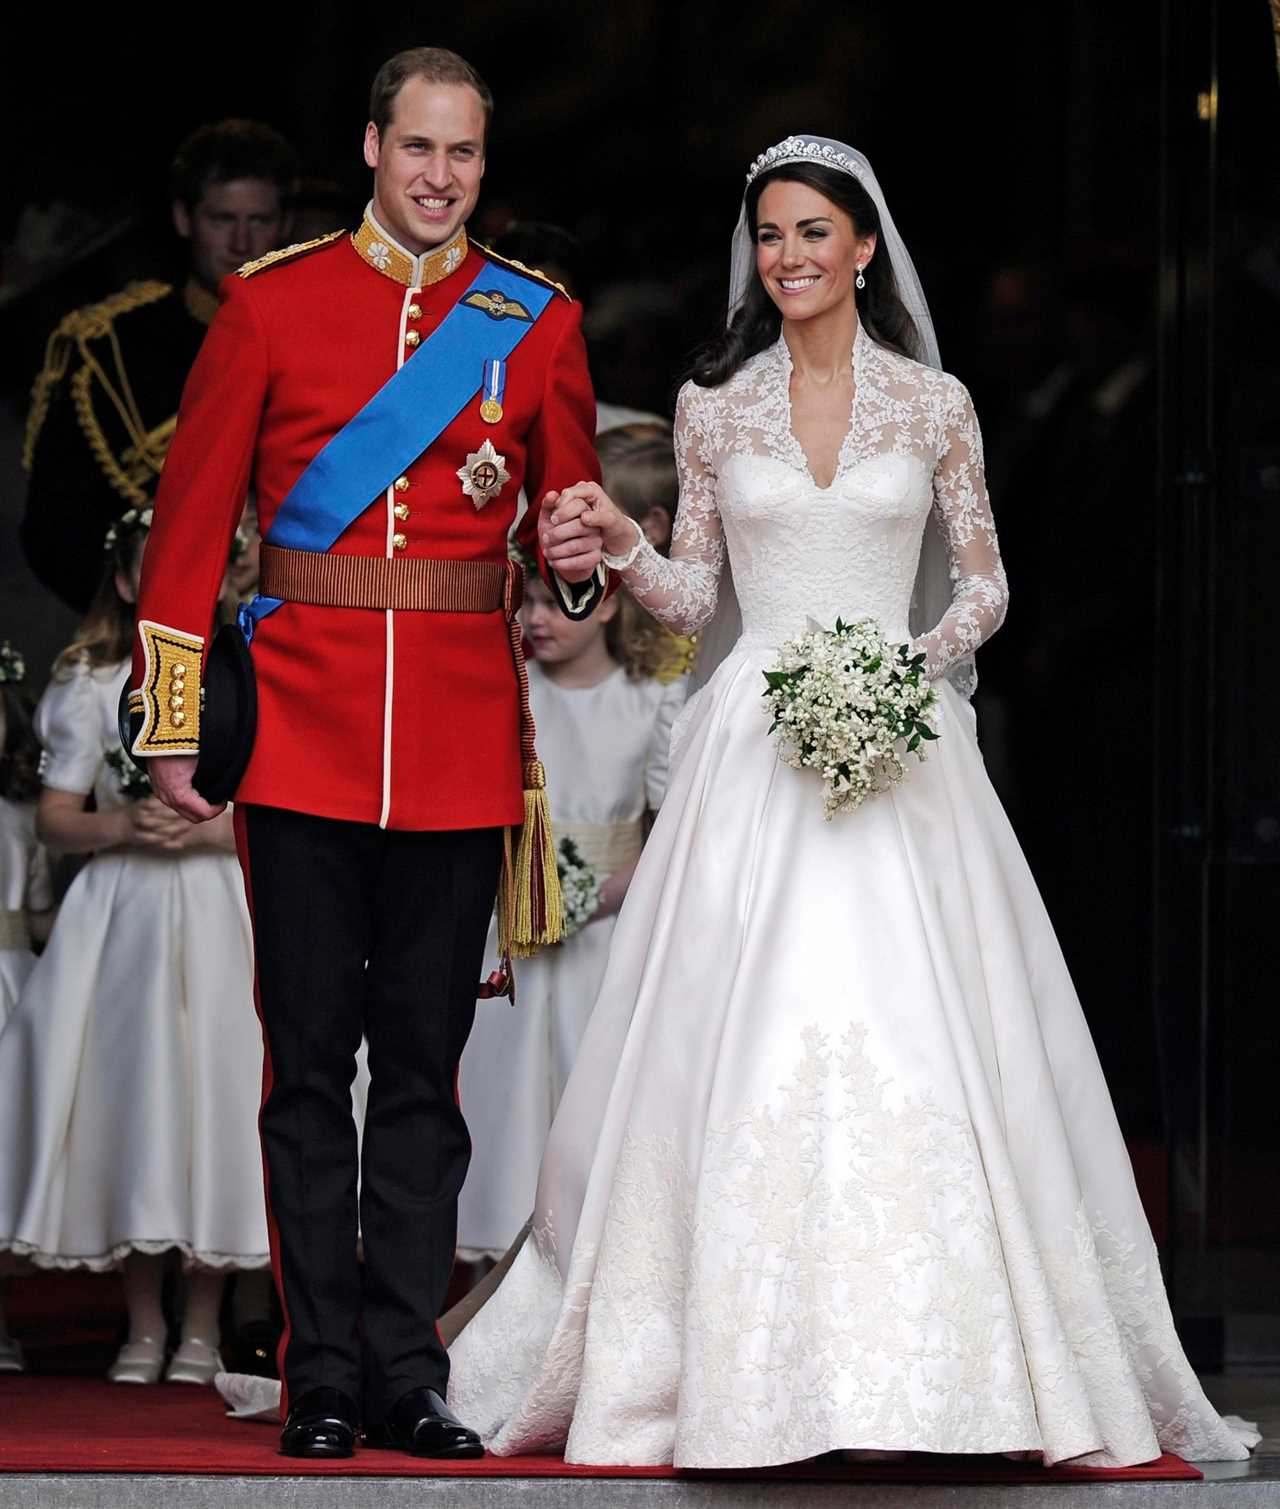 Kate Middleton and Prince William tied the knot in April 2011